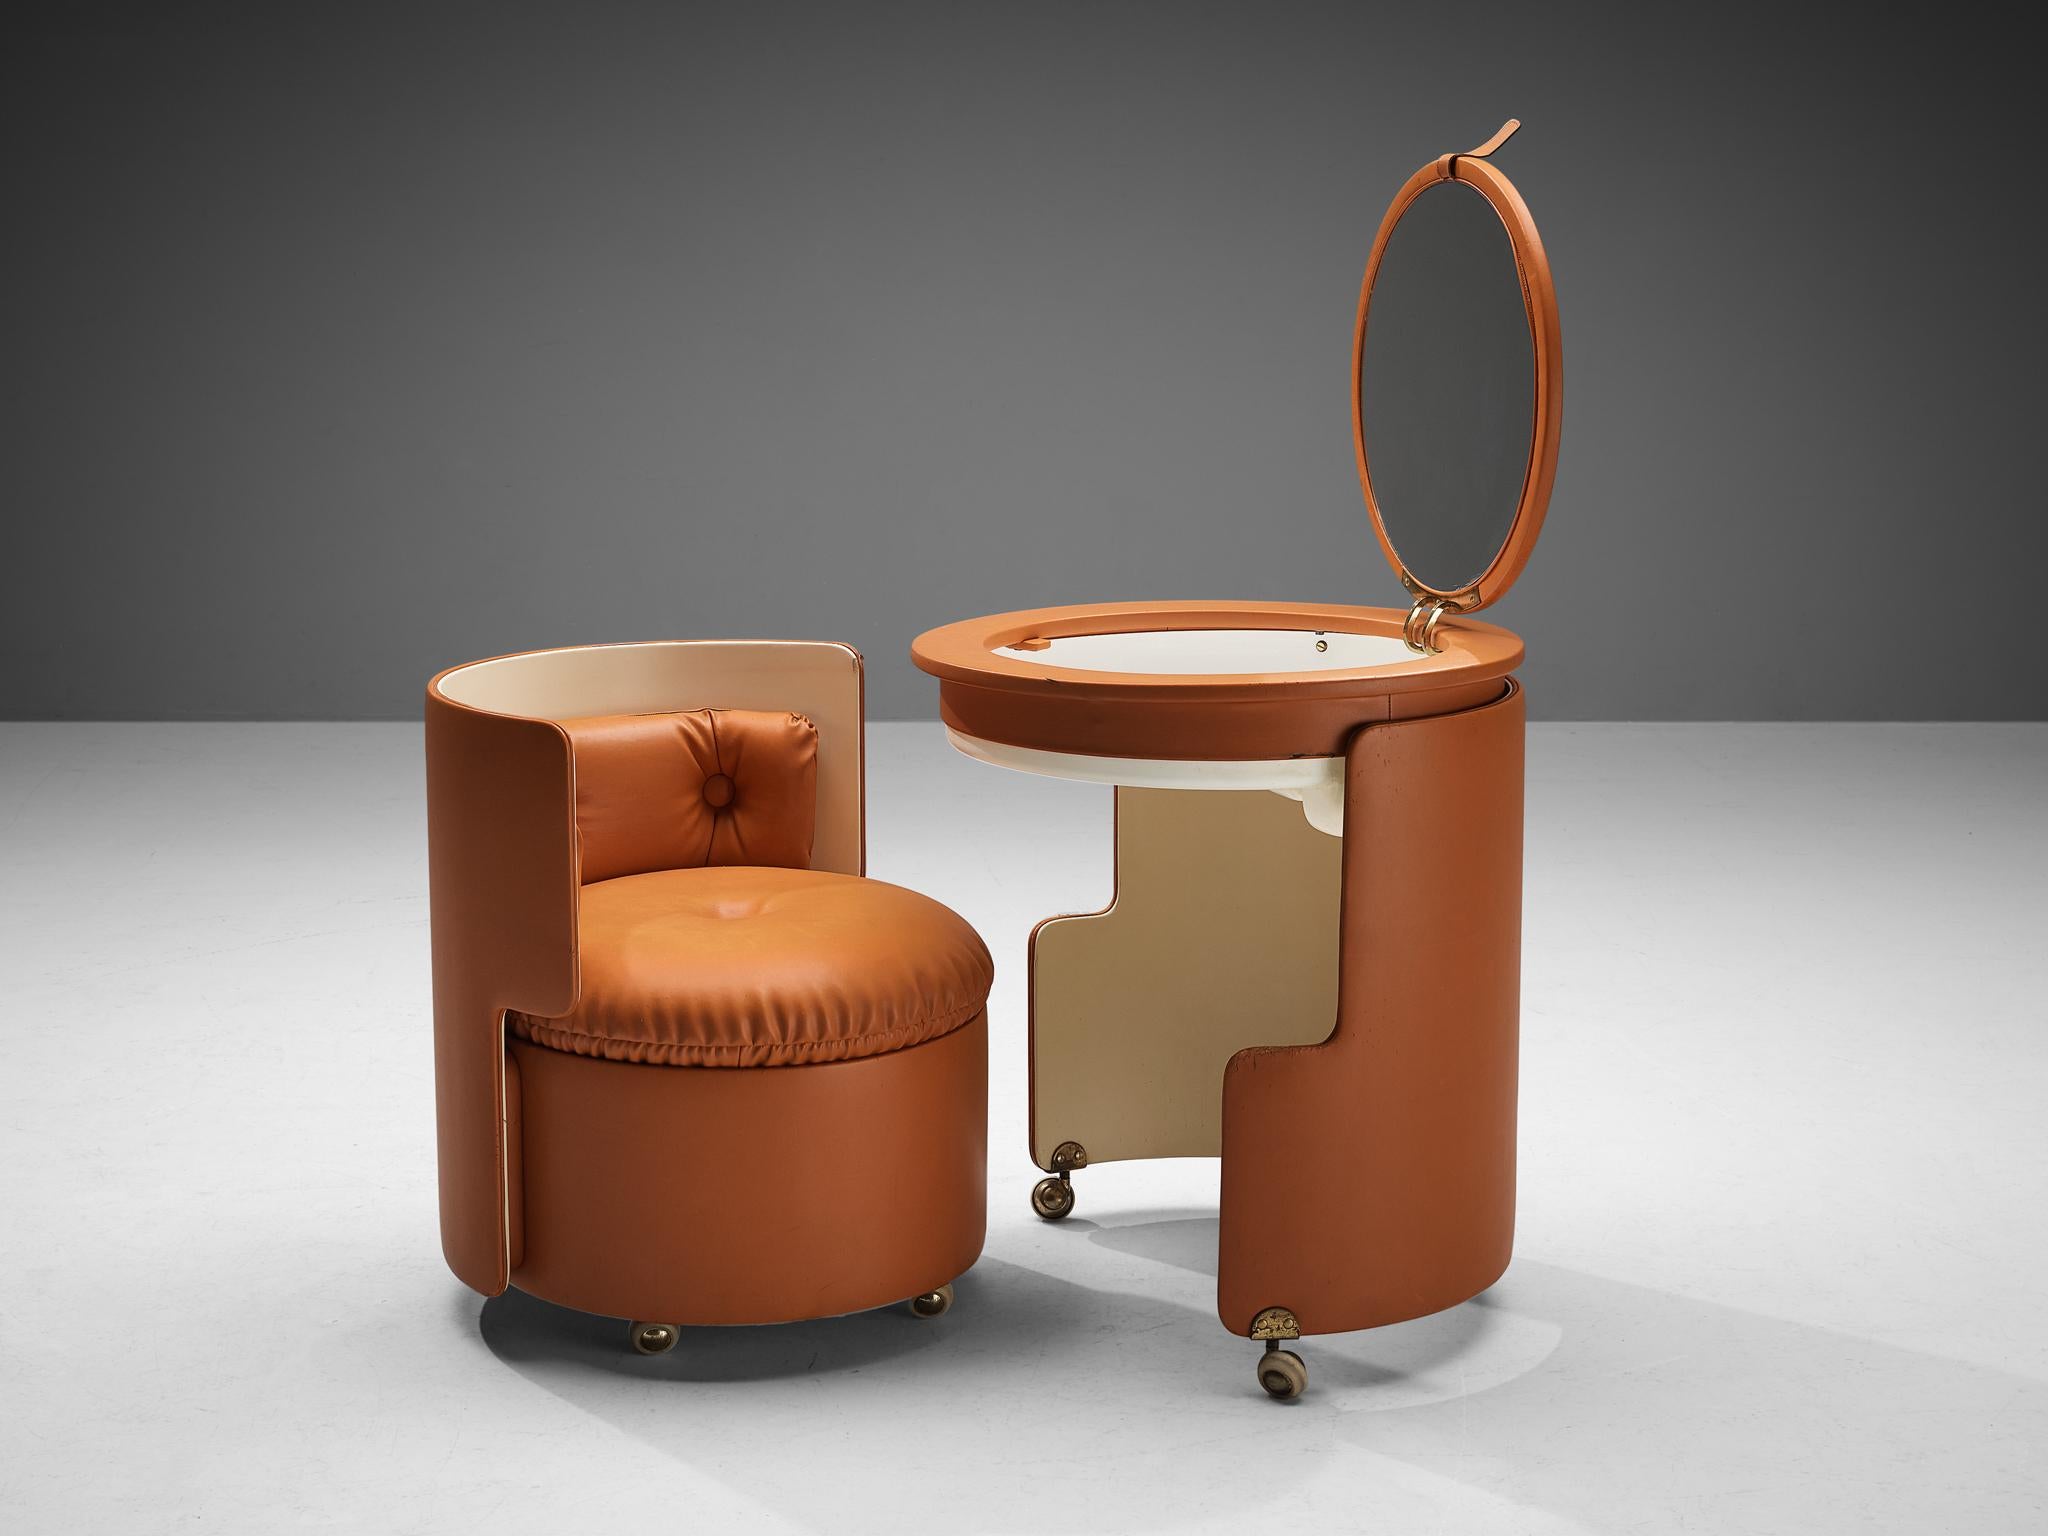 Luigi Massoni for Poltrona Frau, ‘Dilly Dally’ vanity set, mirror, leatherette, fiberglass, brass, Italy, design 1968

Outstanding Italian dressing table executed by Luigi Massoni (1930-2013) in a functional way. Both the table and the chair are